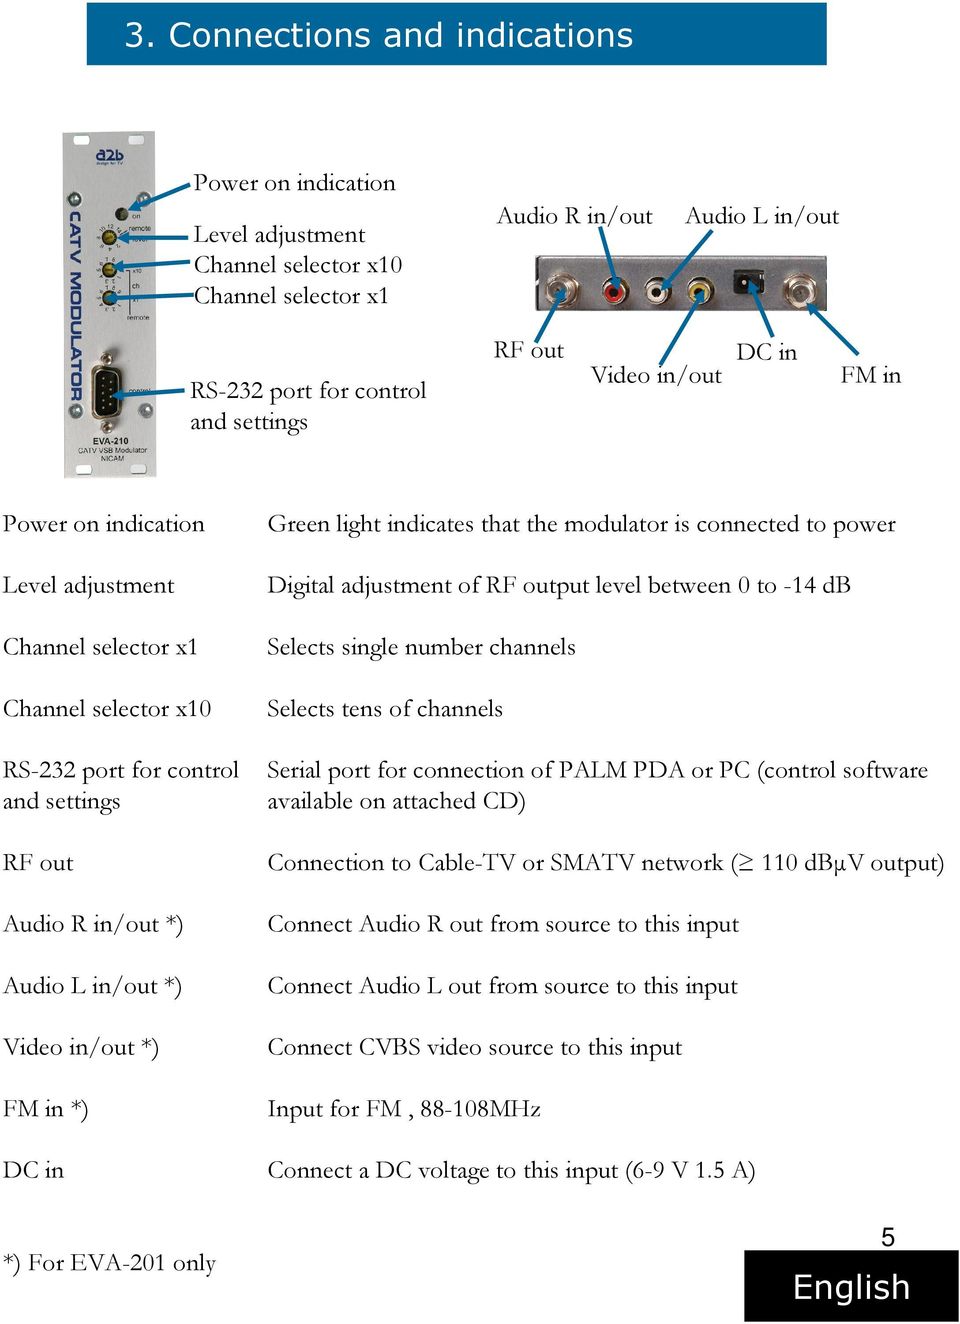 light indicates that the modulator is connected to power Digital adjustment of RF output level between 0 to -14 db Selects single number channels Selects tens of channels Serial port for connection